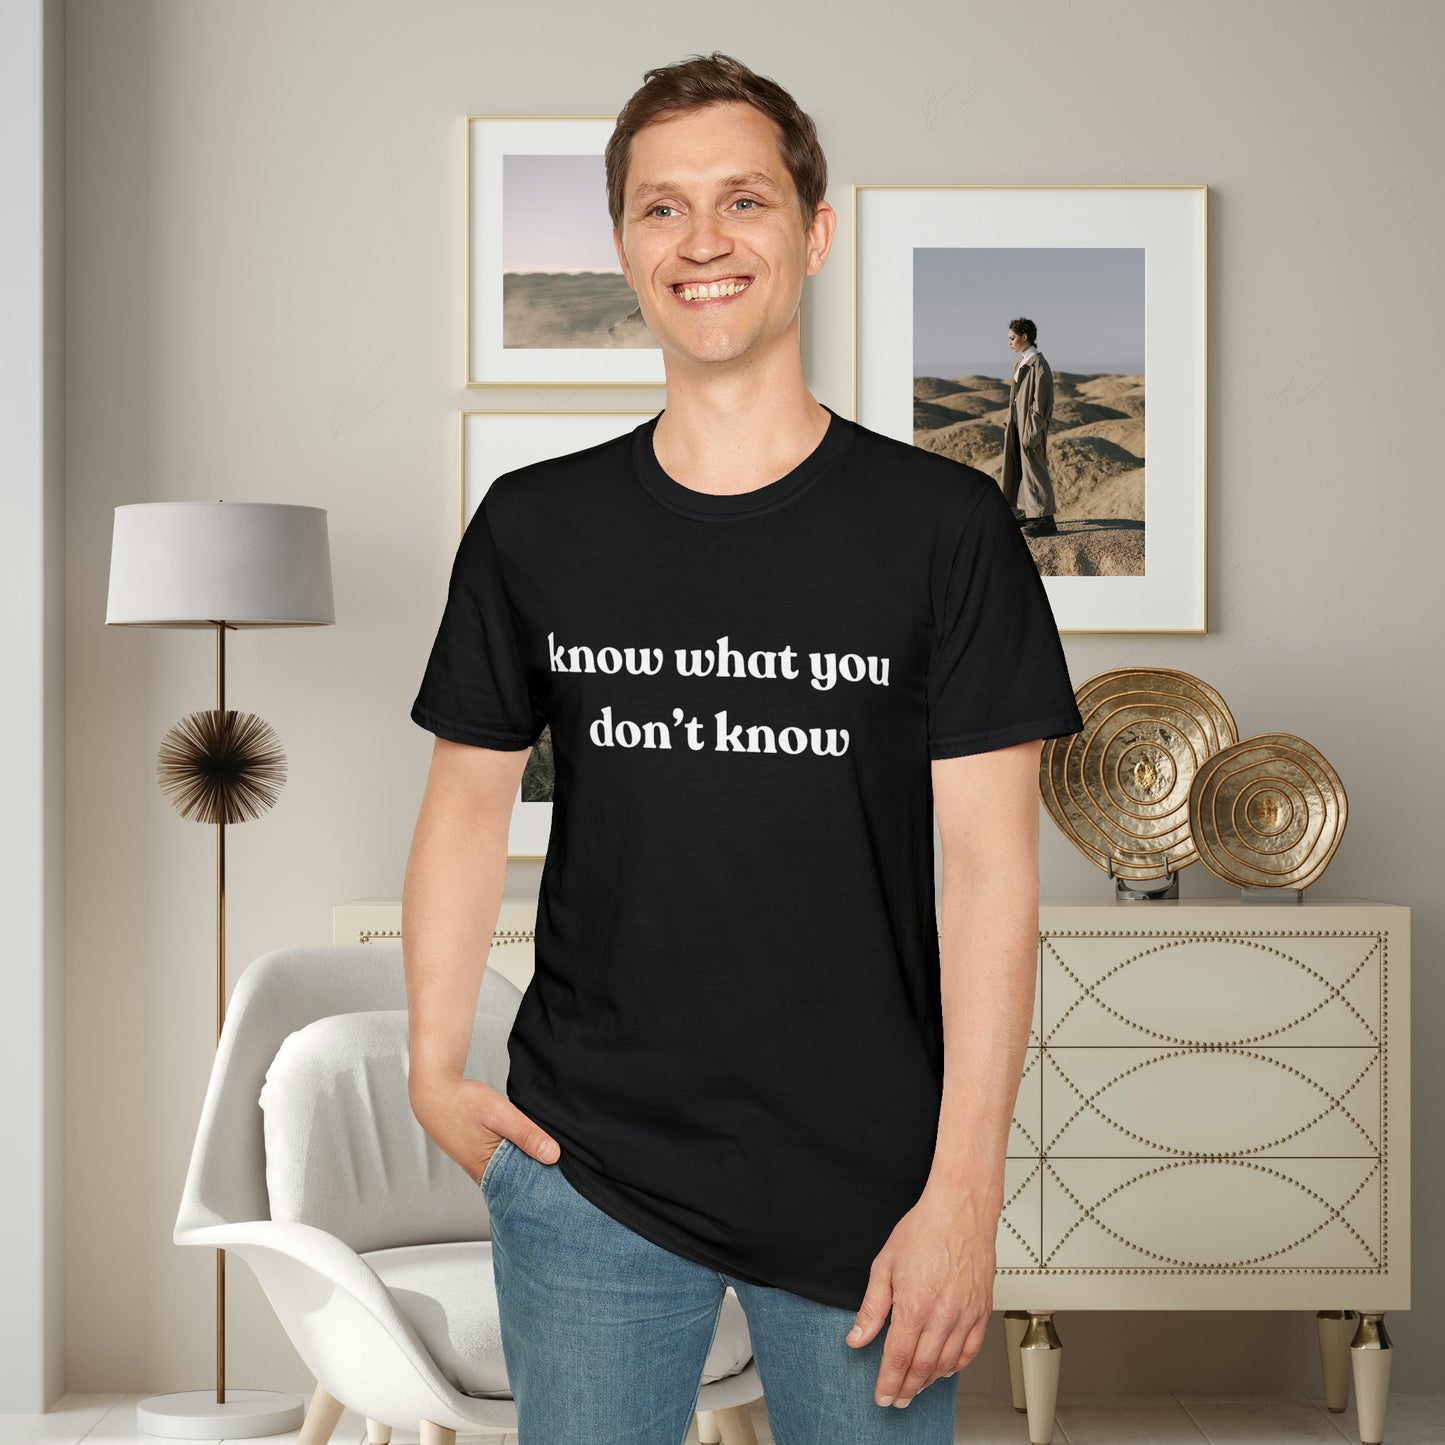 Simple “know what you don’t know” message on this Unisex Softstyle T-Shirt. Be curious and learn!